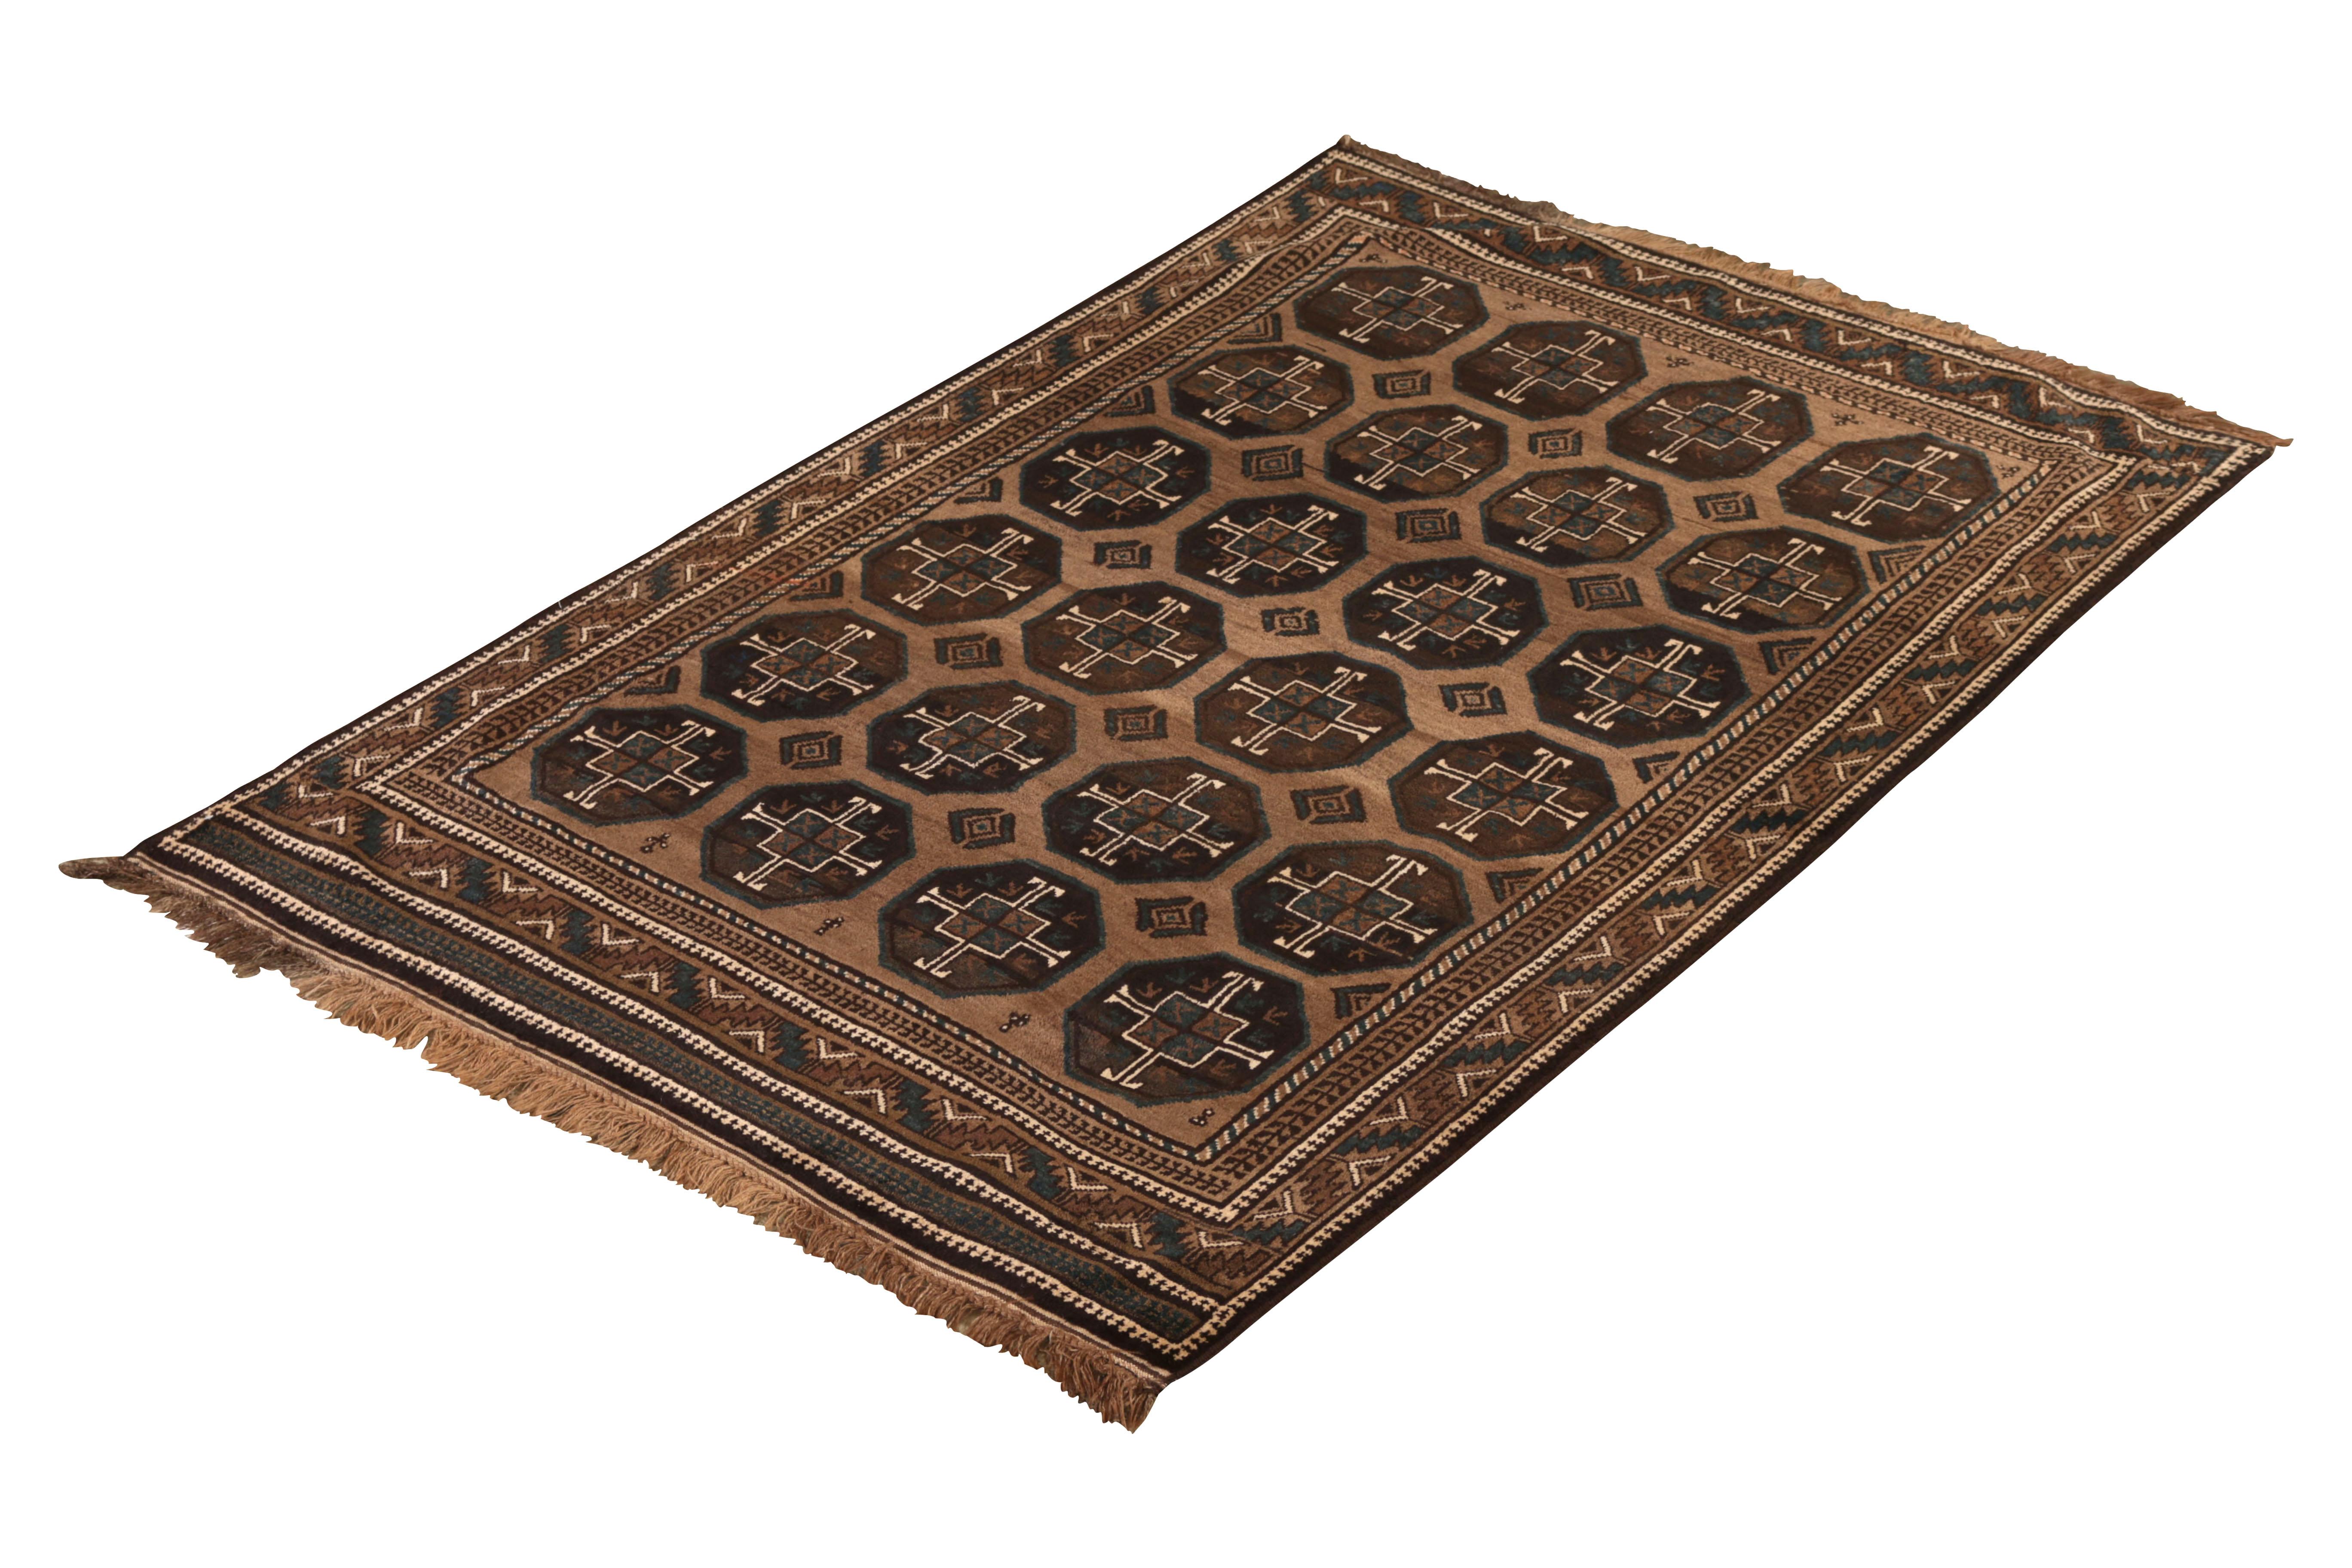 Hand knotted in wool originating from Persia circa 1950s, this antique rug connotes a distinctive Baluch tribal rug design, celebrated for bold geometry and rustic, rich colorway renown among Classic Persian rug families. This particular